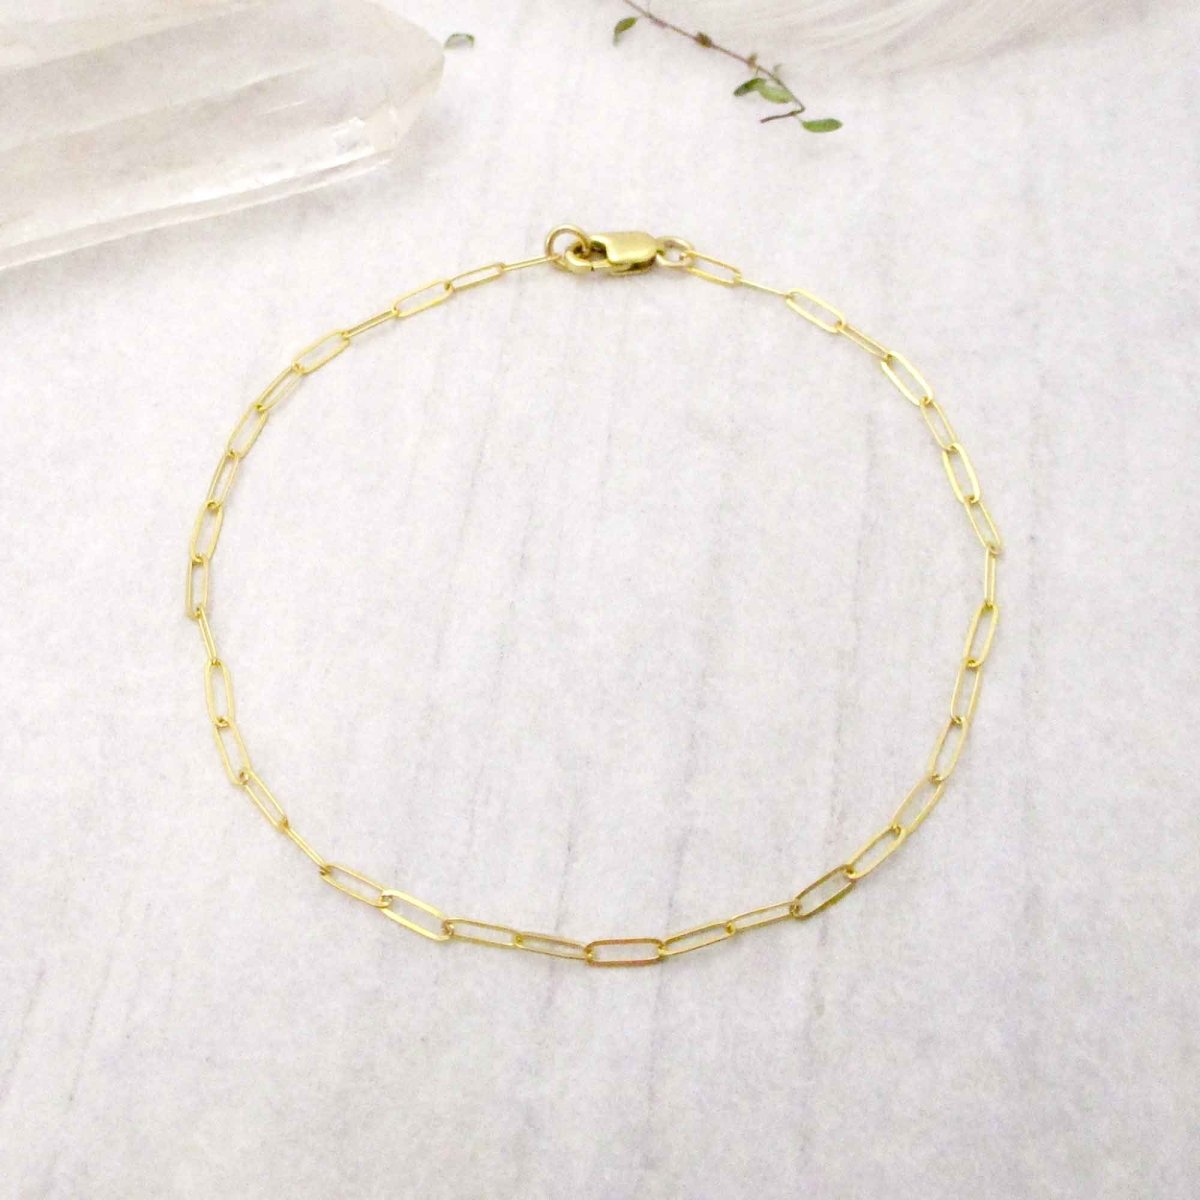 Gold Paperclip Chain Bracelet, Solid 14K Gold. - Luxe Design Jewellery